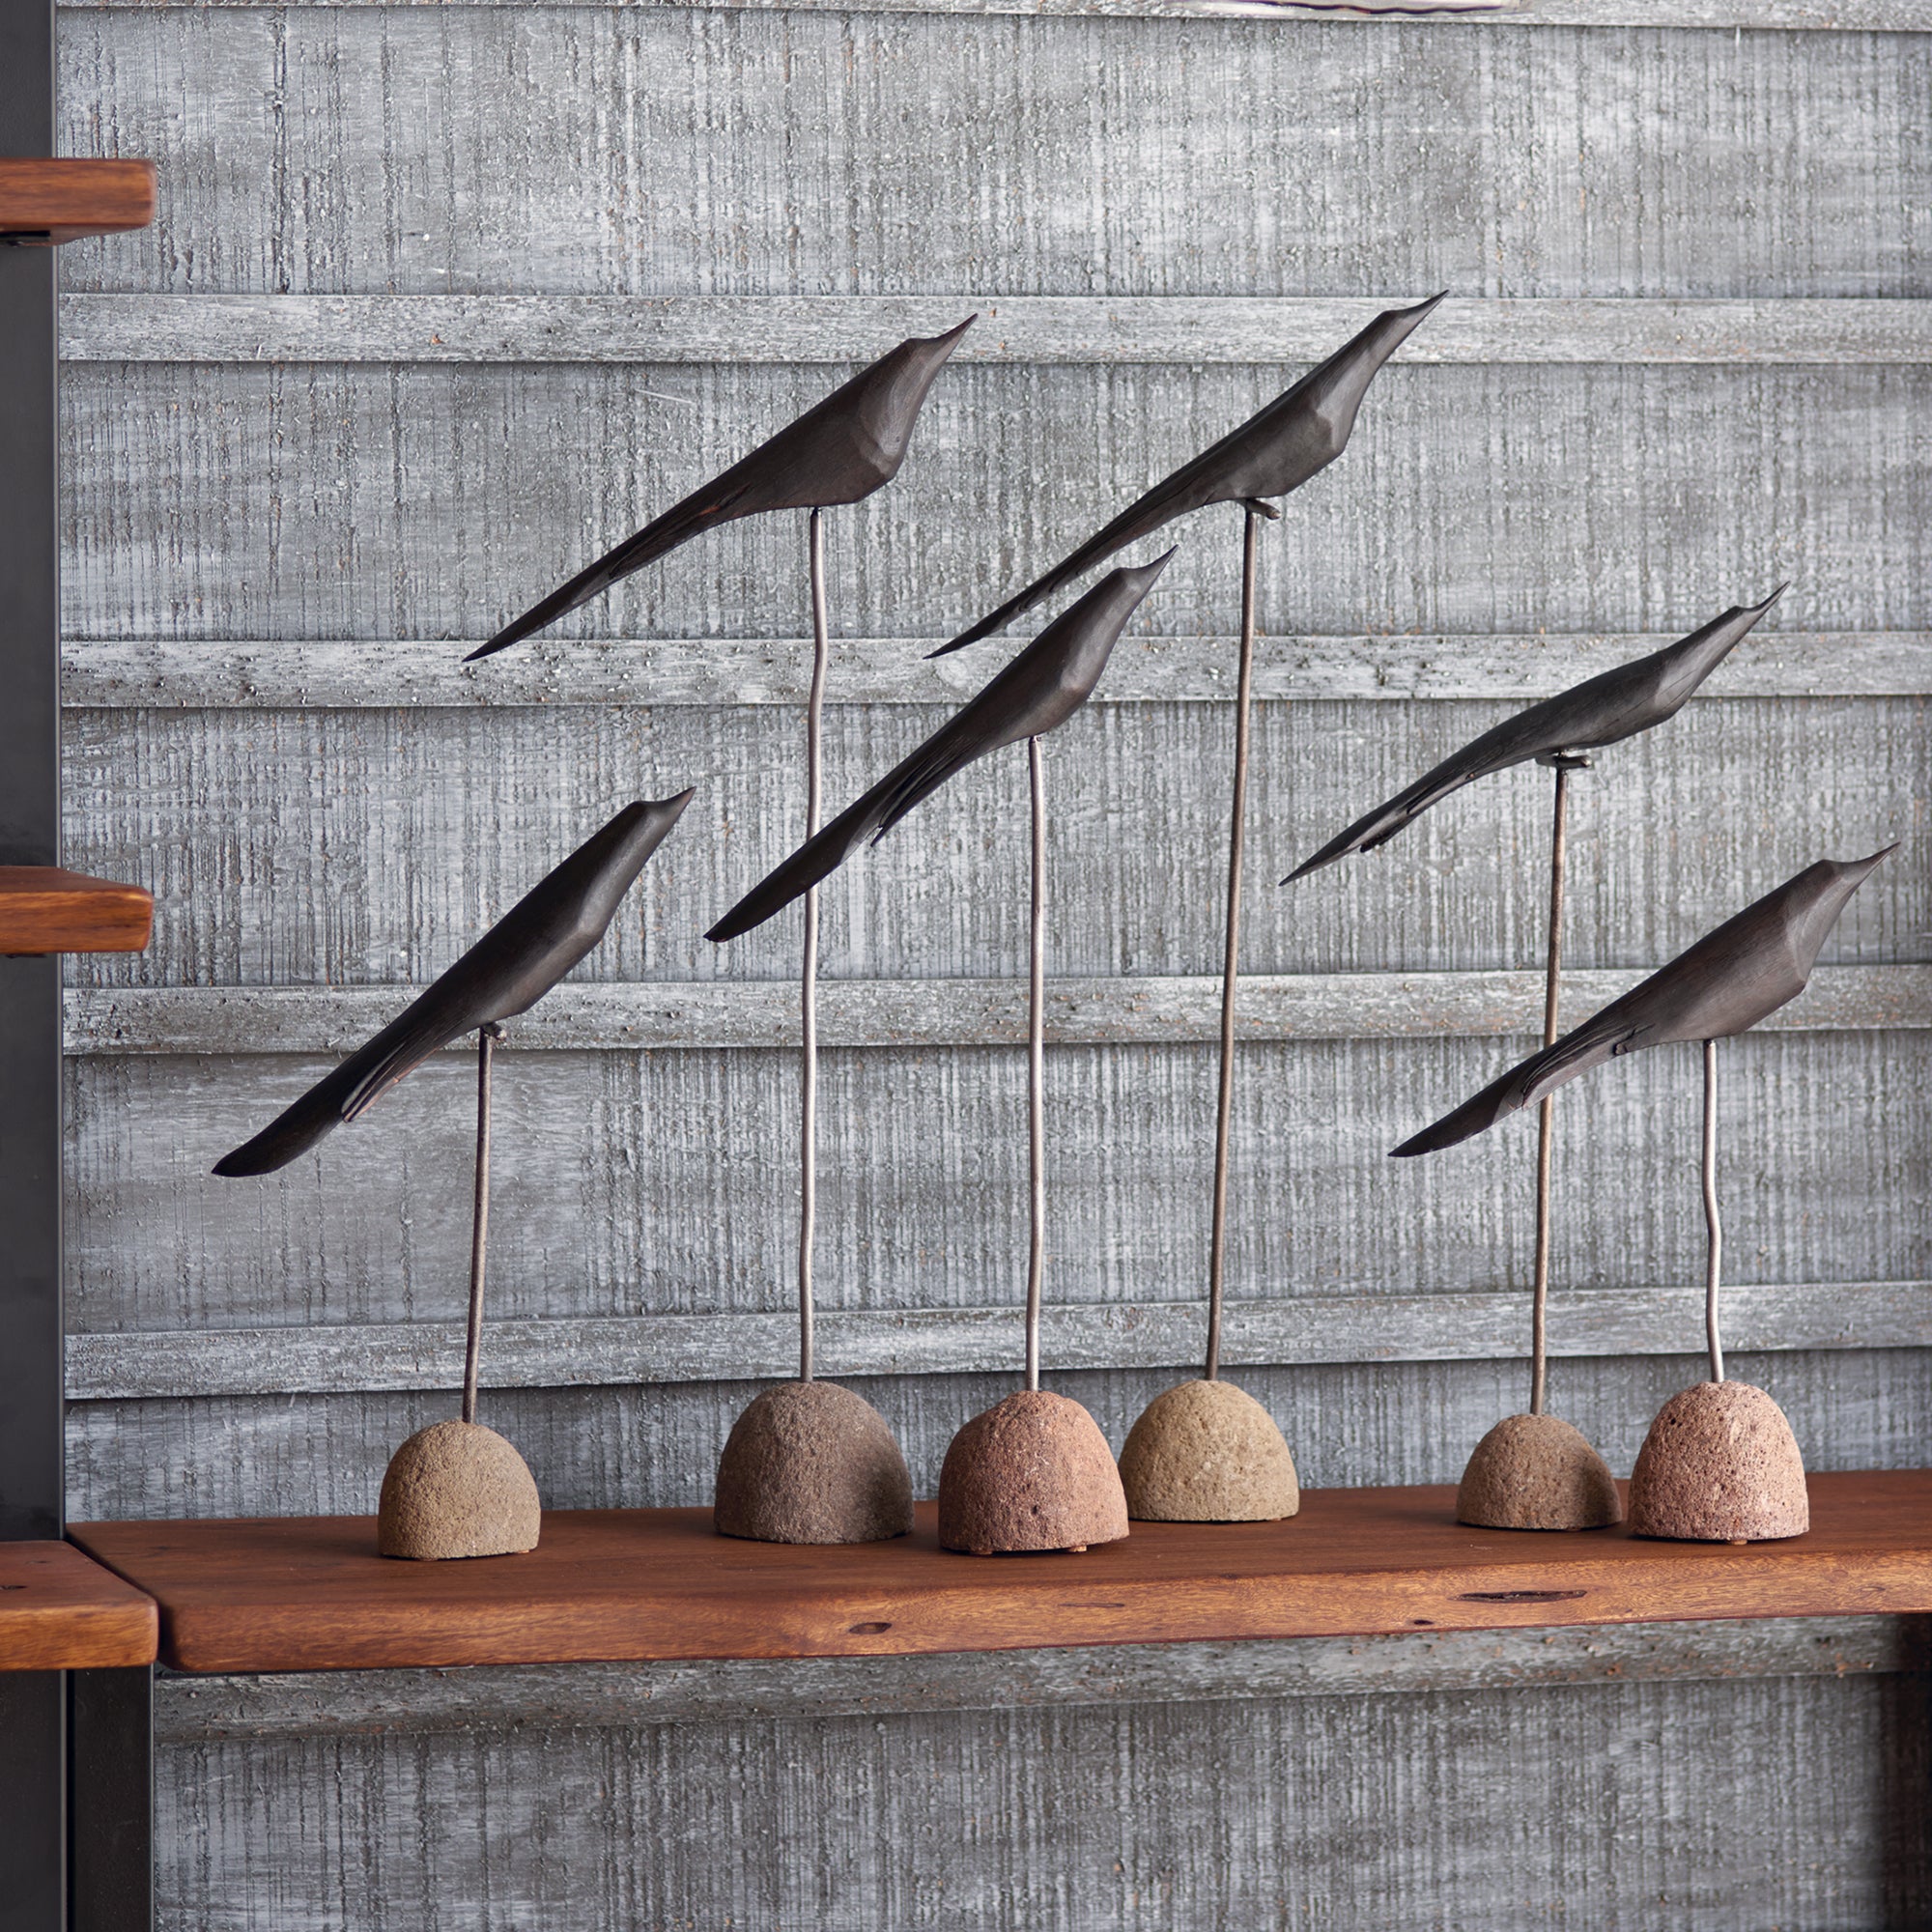 Handcrafted rustic artwork with modern black birds. Amethyst Home provides interior design, new construction, custom furniture, and area rugs in the Park City metro area.